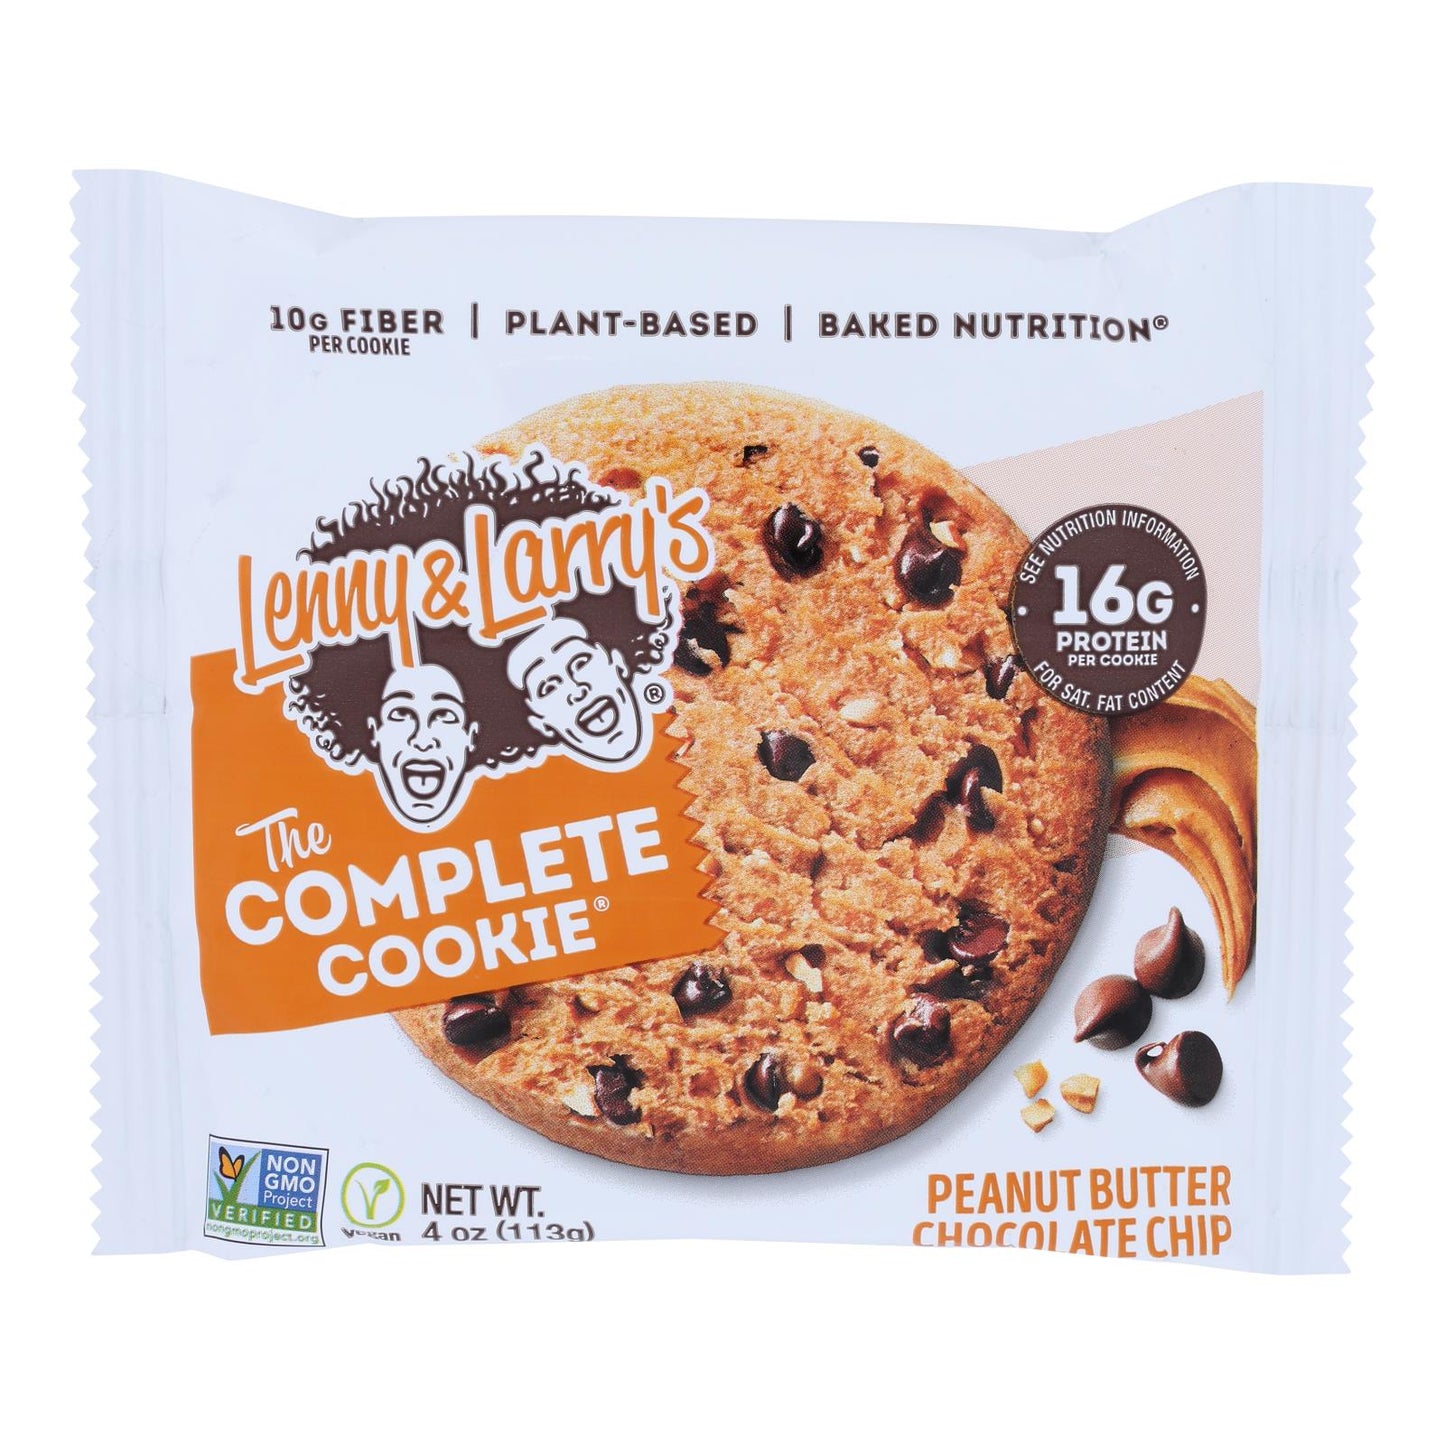 Lenny & Larry's - Complete Cookie Peanut Butter Chocolate Chip - Case Of 12-4 Oz